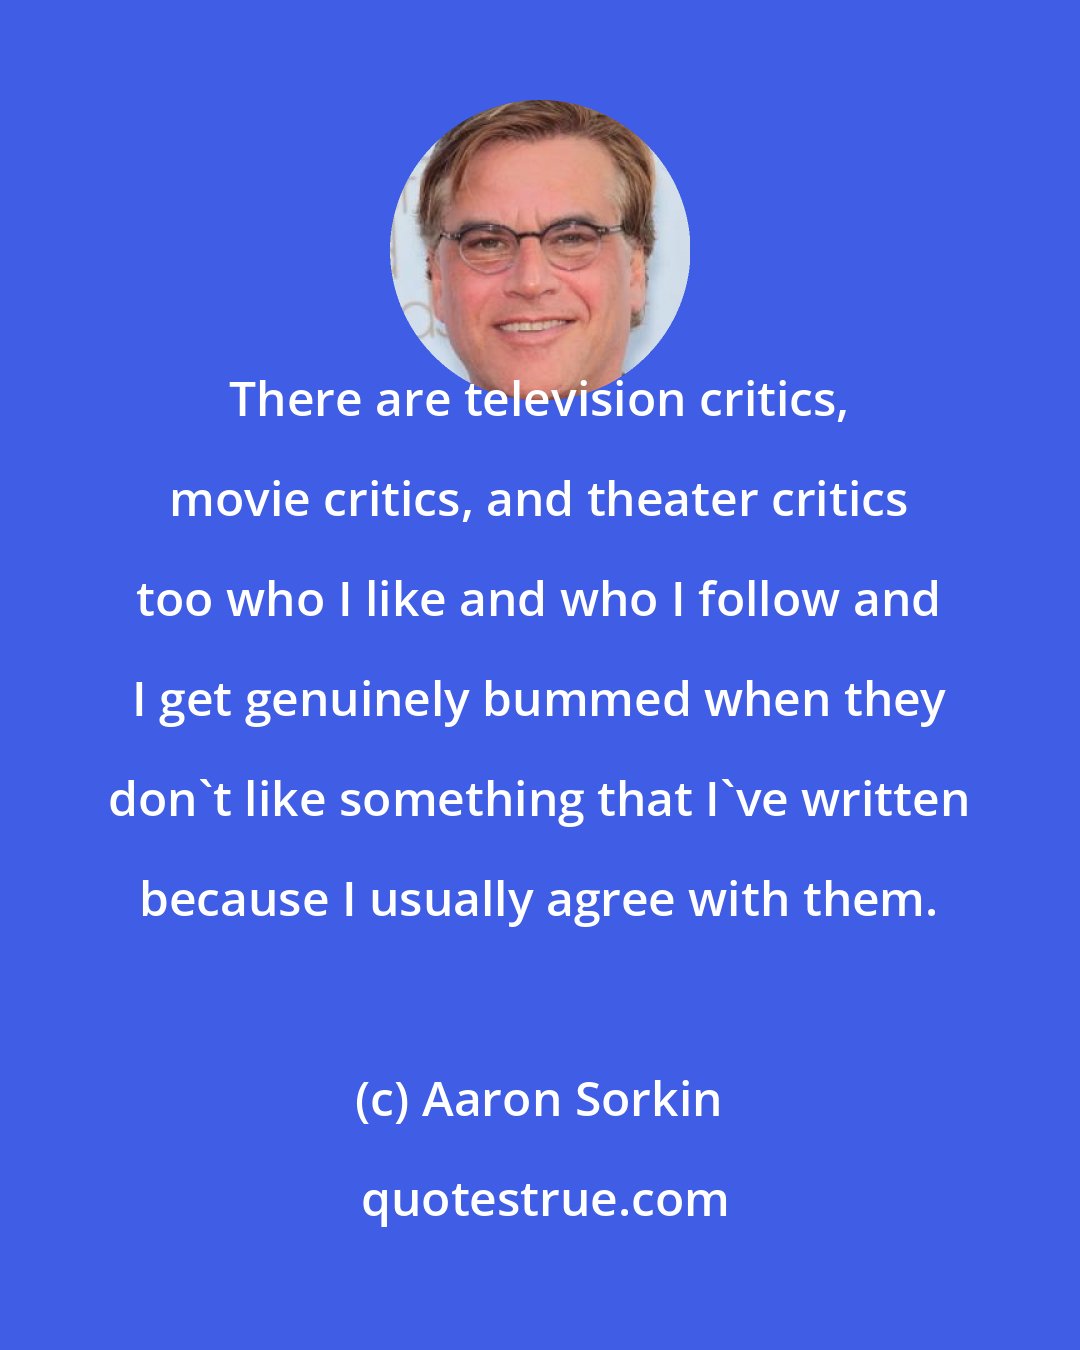 Aaron Sorkin: There are television critics, movie critics, and theater critics too who I like and who I follow and I get genuinely bummed when they don't like something that I've written because I usually agree with them.